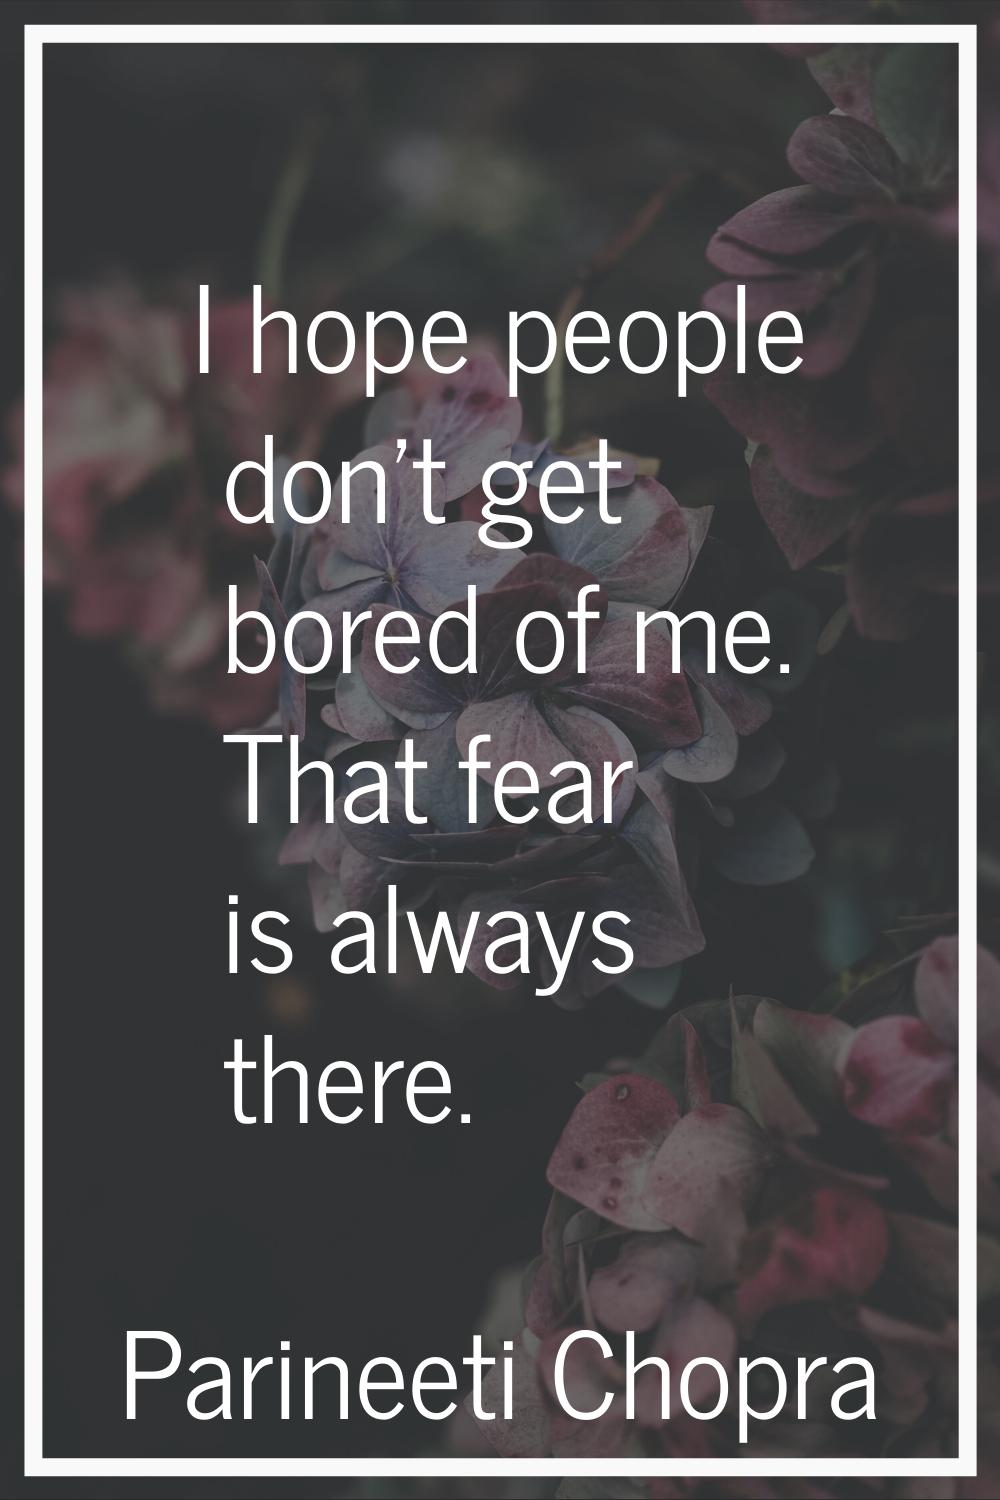 I hope people don't get bored of me. That fear is always there.